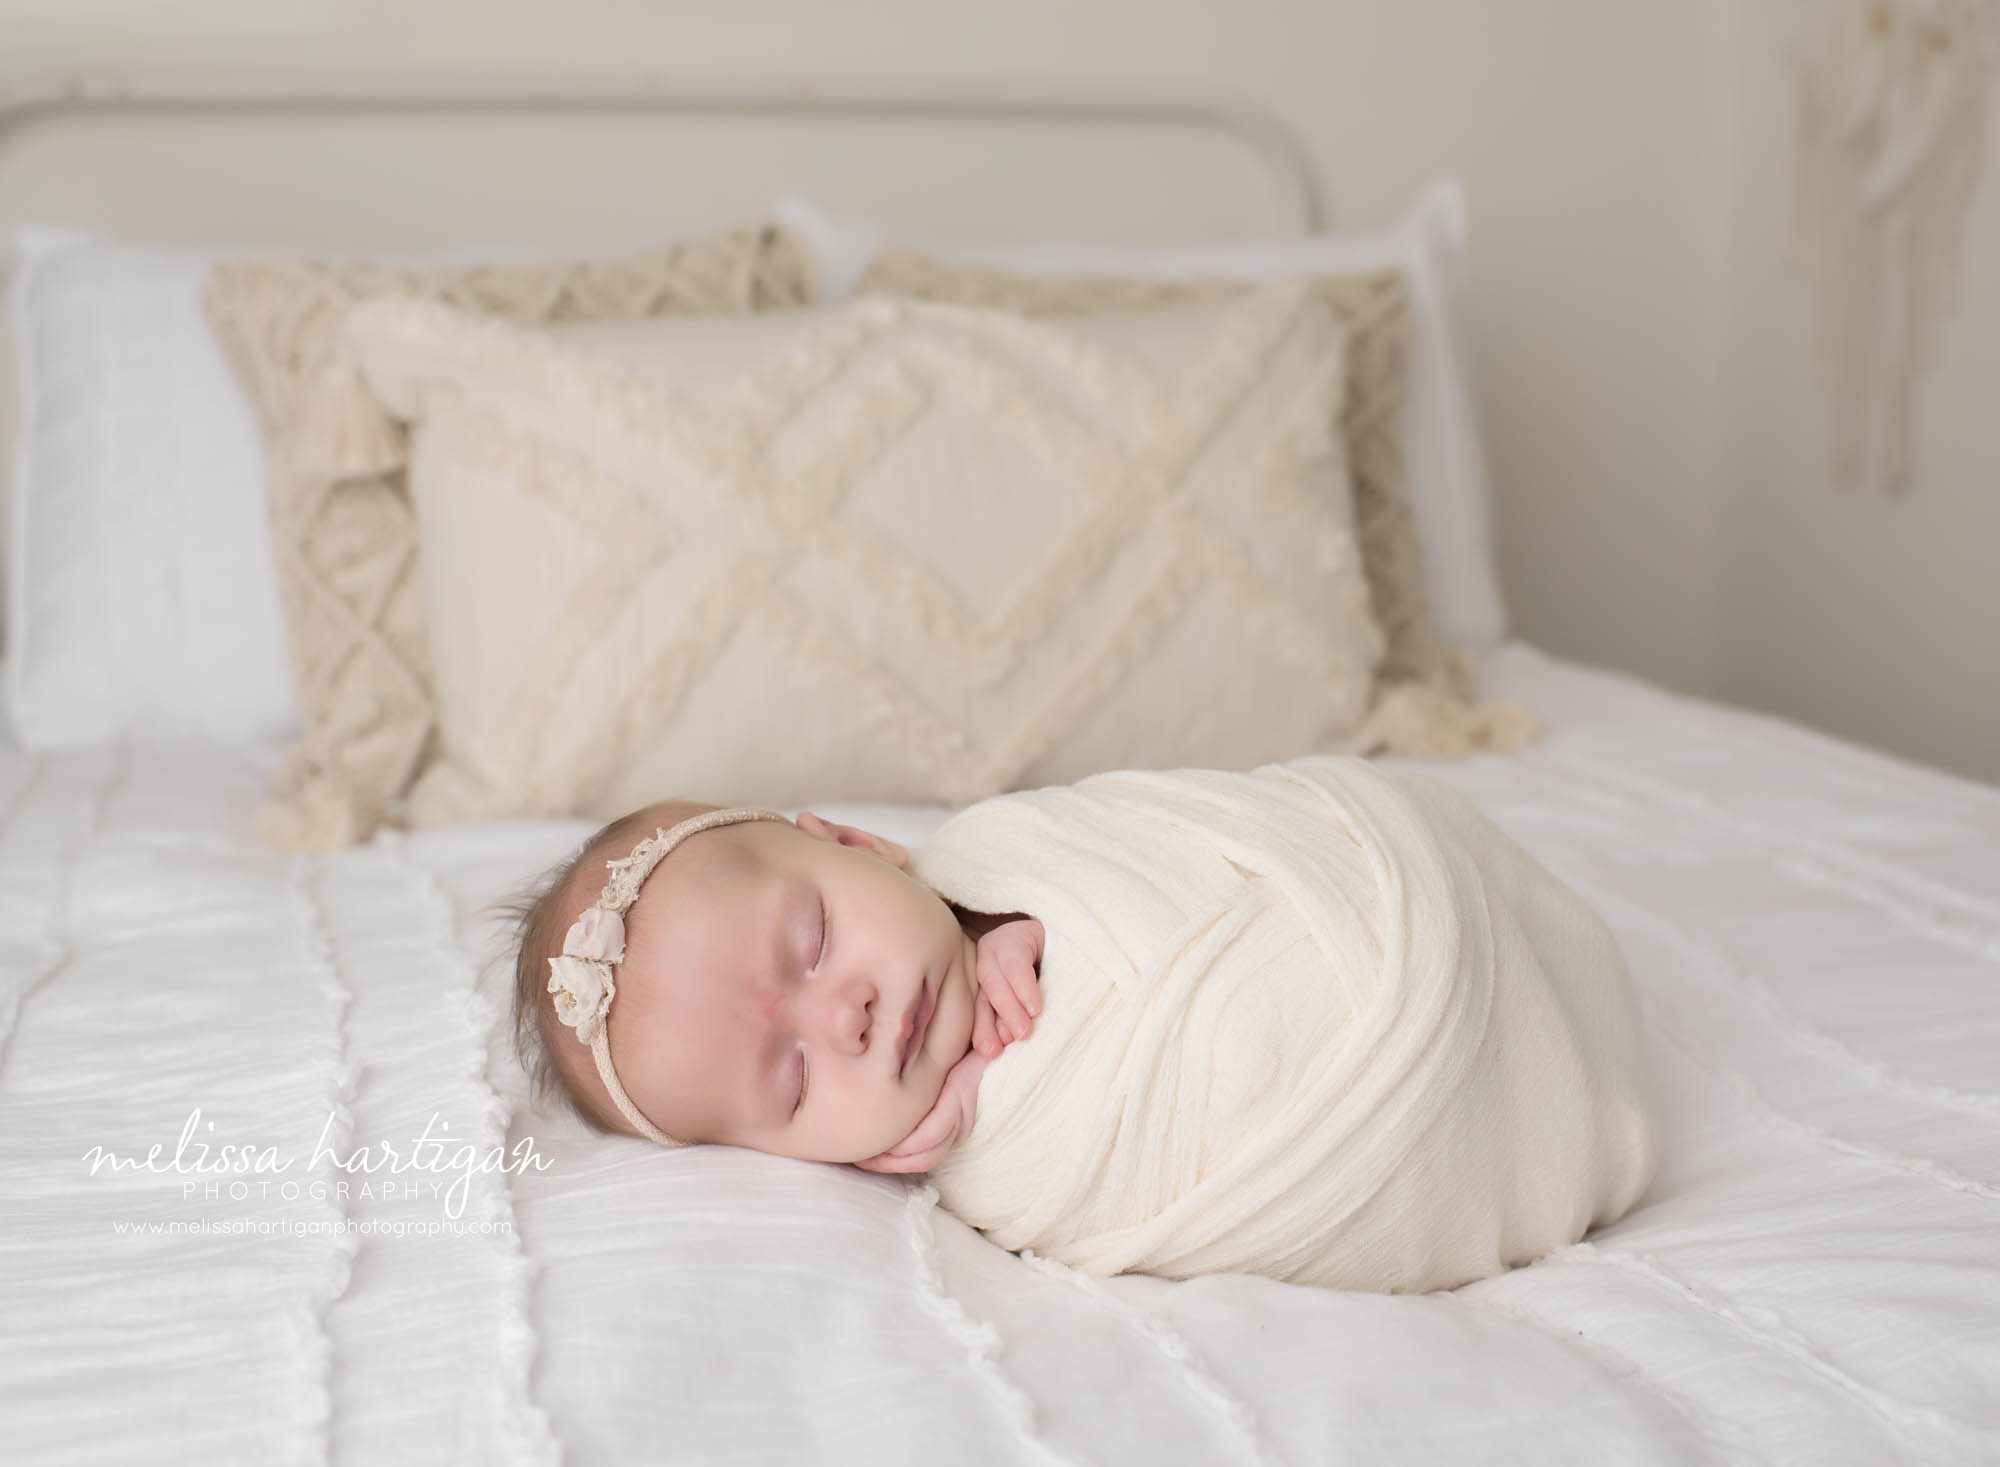 wrapped newborn baby girl posed in studio bed as prop